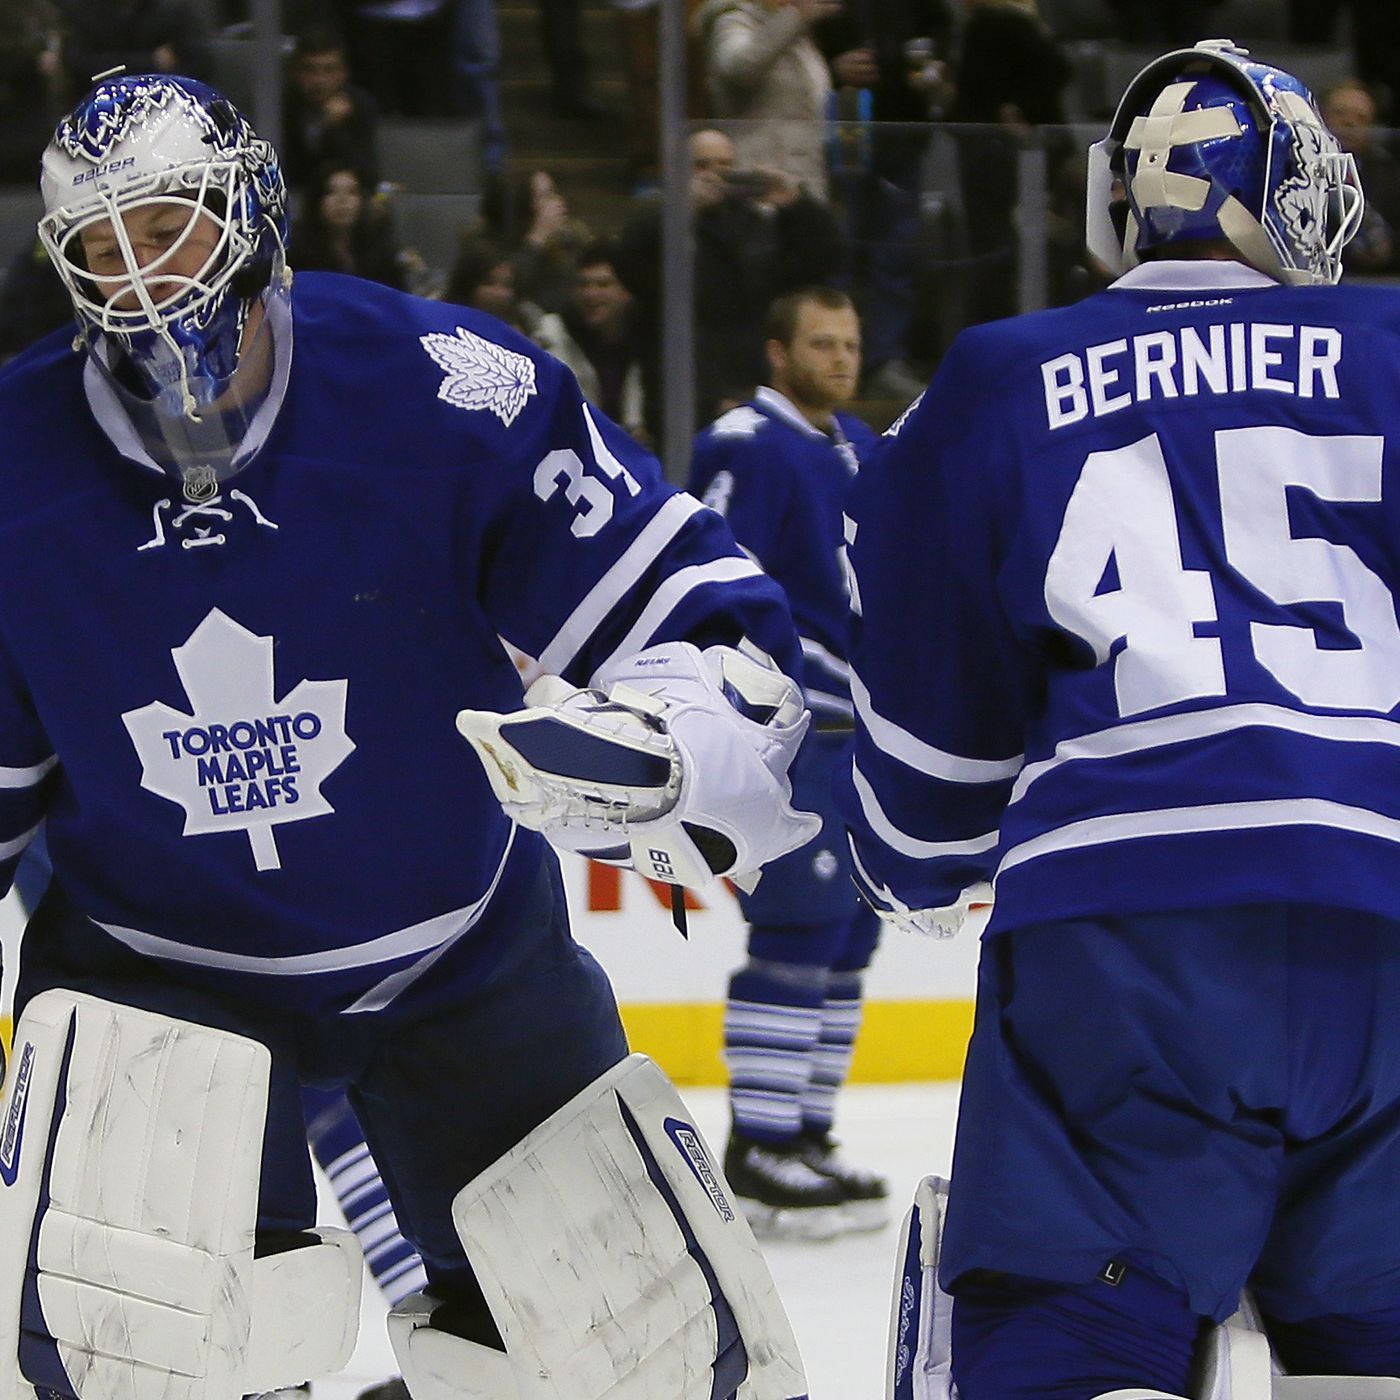 James Reimer, Jonathan Bernier, and the difficulty of evaluating